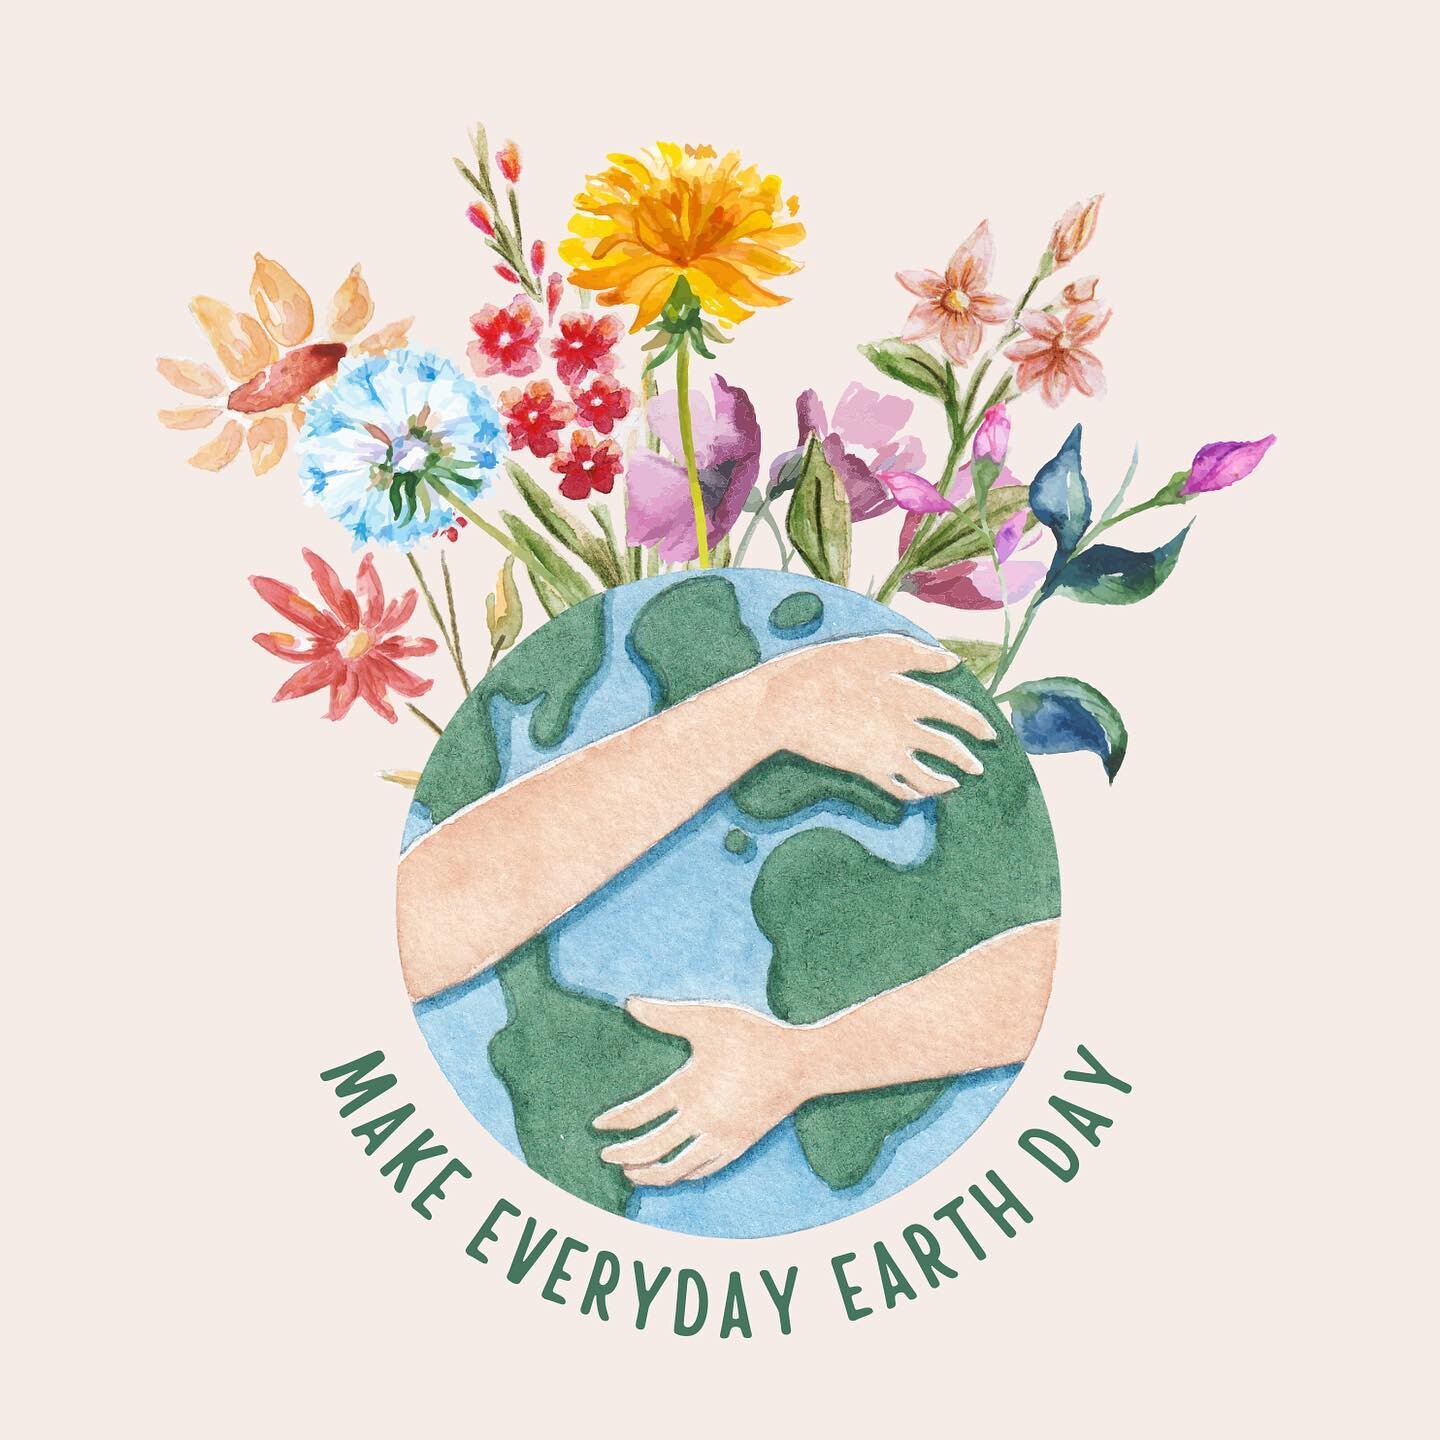 Happy Earth Day! 🌍 

To celebrate here are 10 things you can do today to help our planet. Let us know in the comments which one you&rsquo;re doing! 

-Plant something
-Ride your bike
-Support a climate org like @sunrisemvmt
-Make a water conservatio